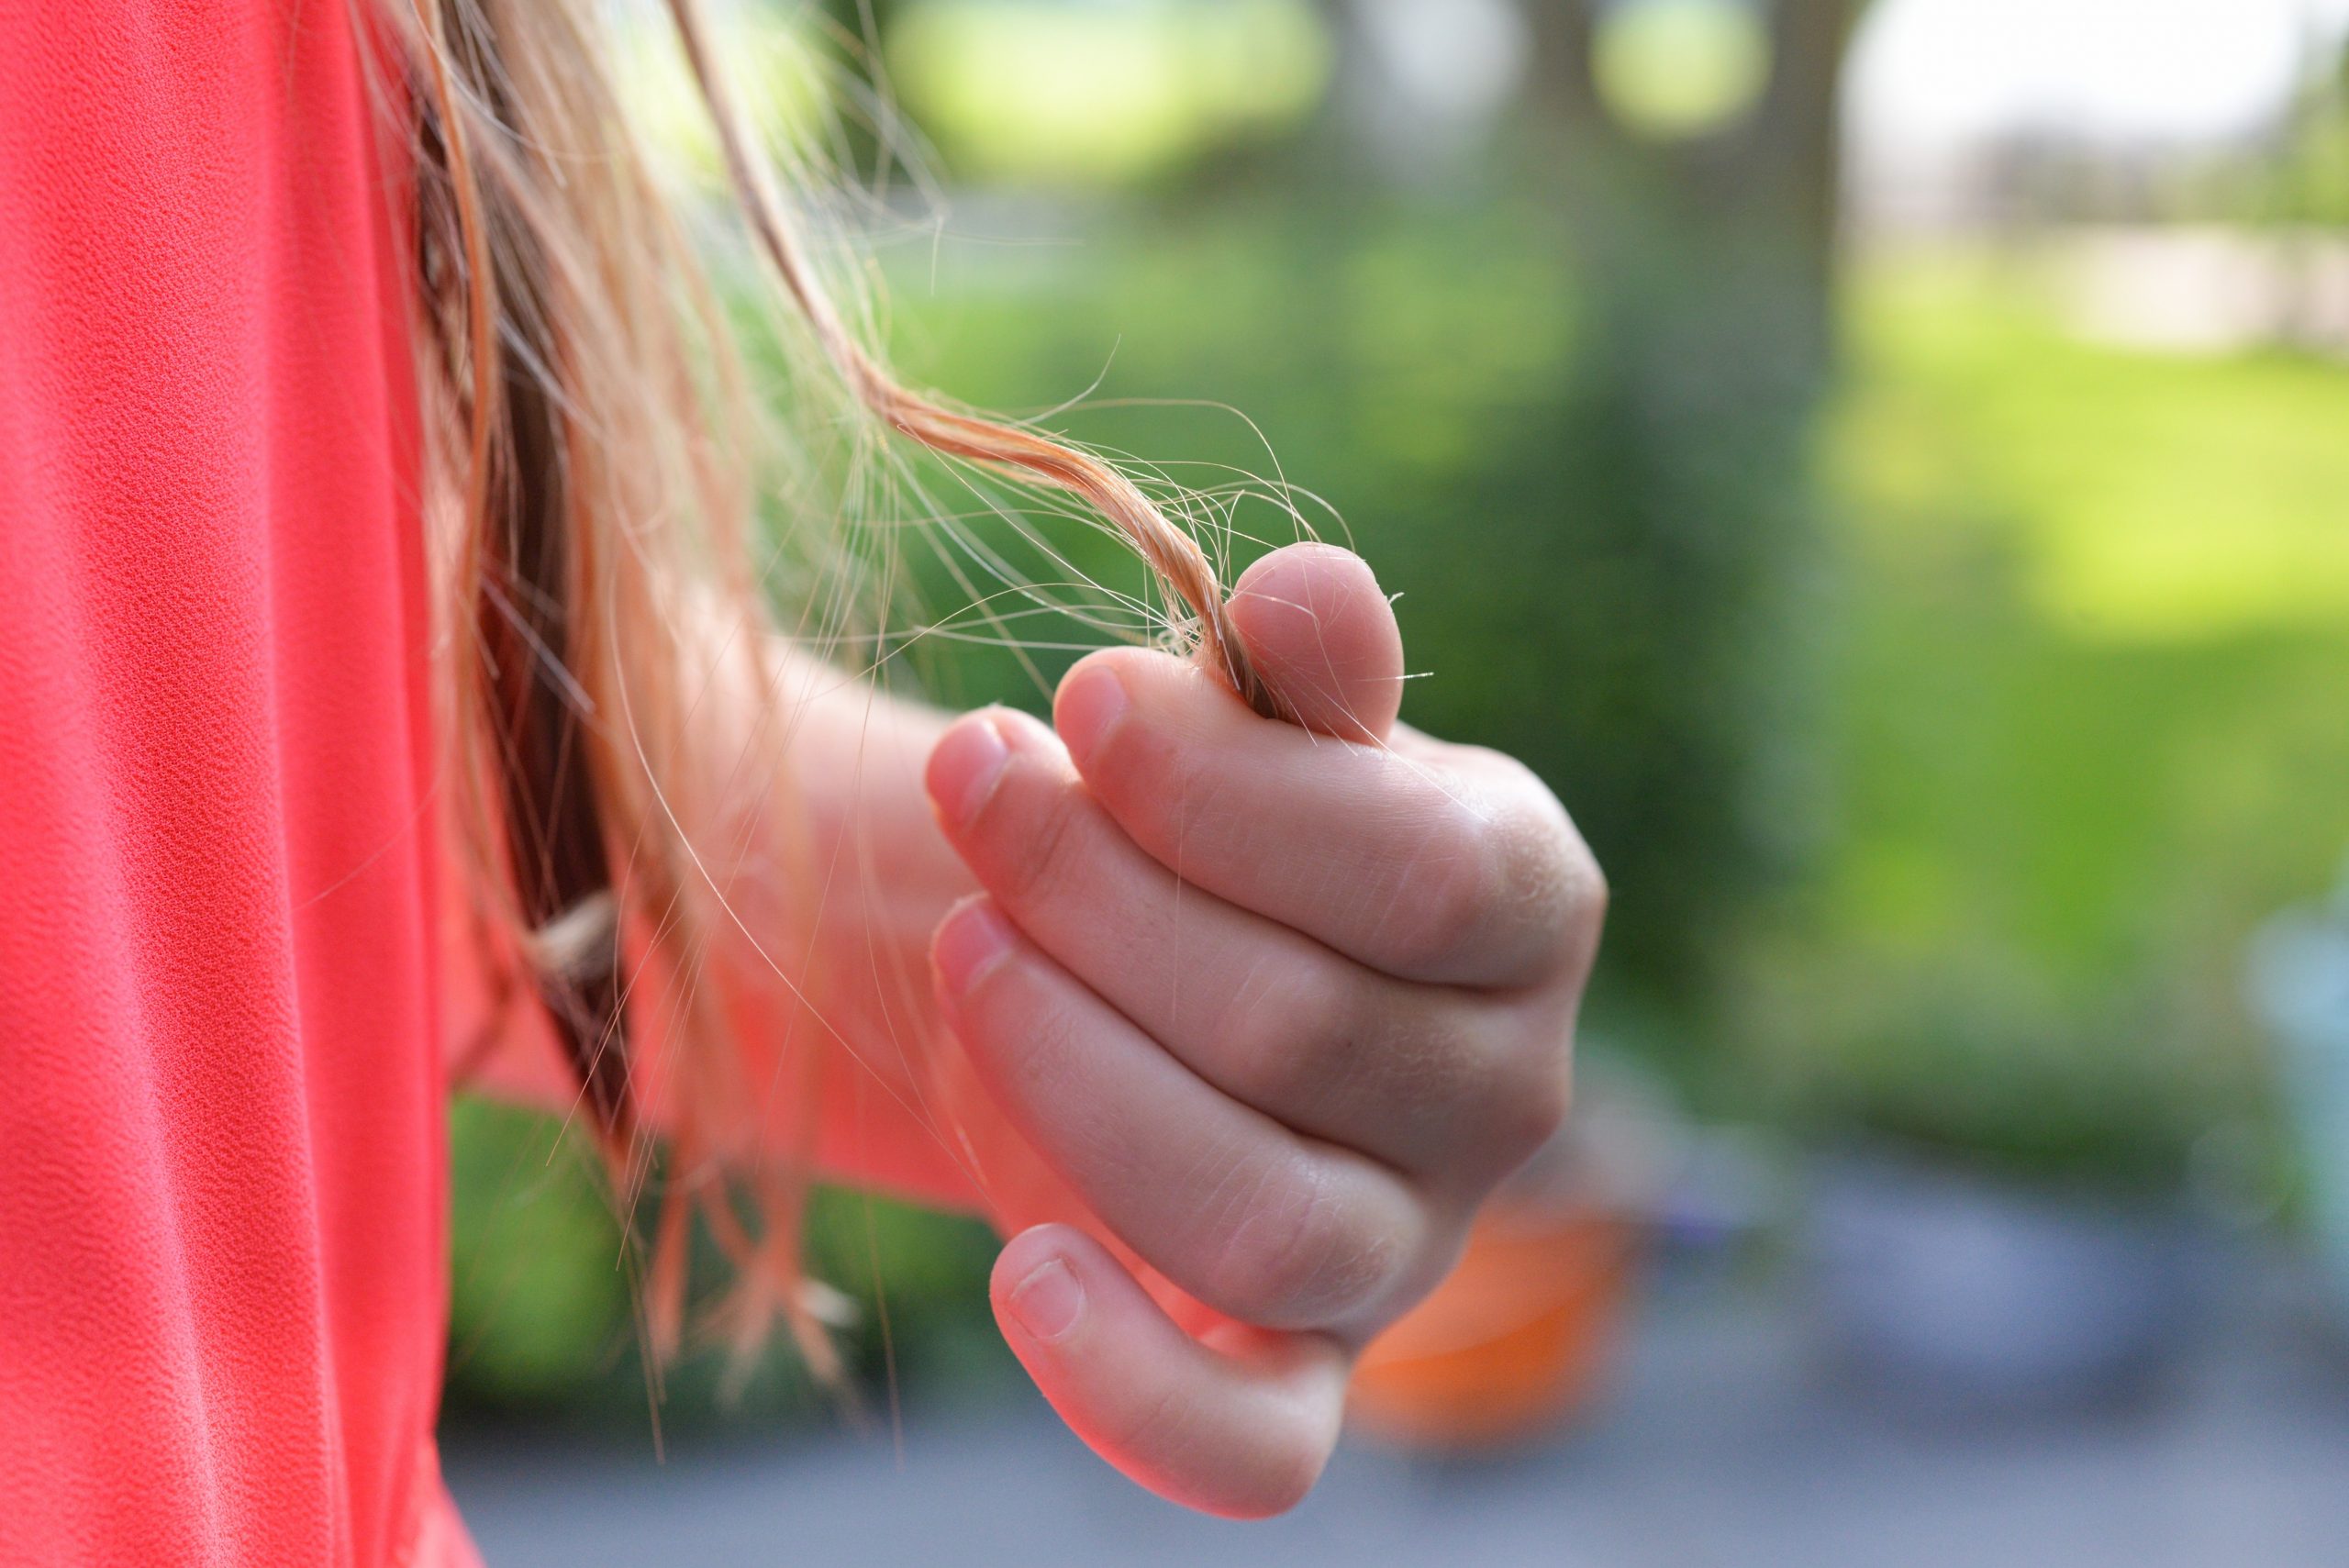 Trichotillomania, or the compulsive habit of pulling out hair and hairs